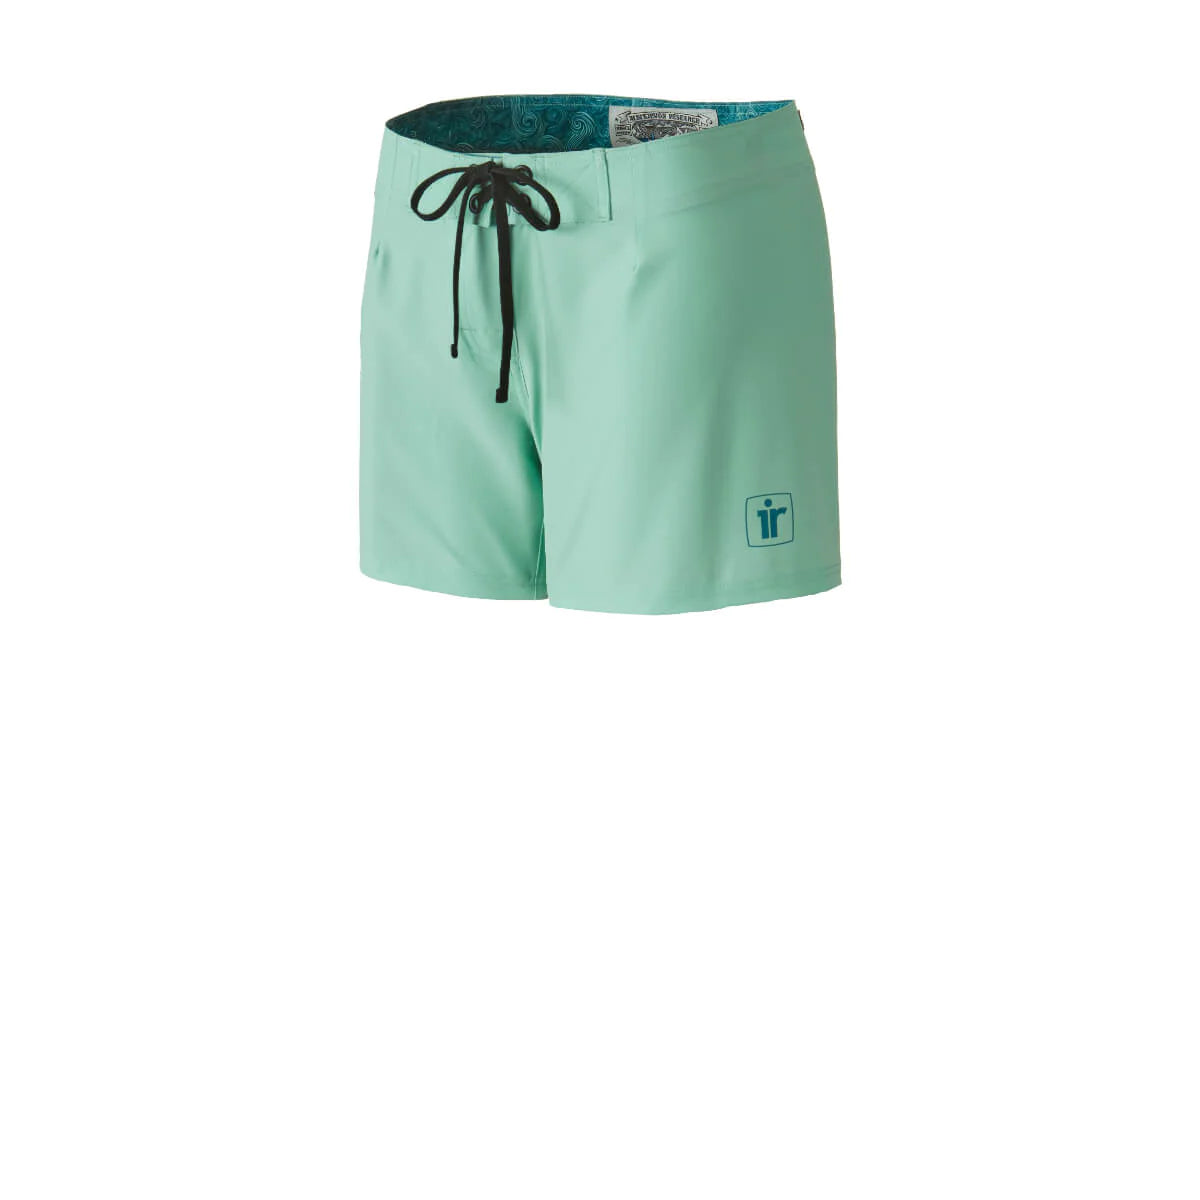 Immersion Research Women's Heshie Boardshorts